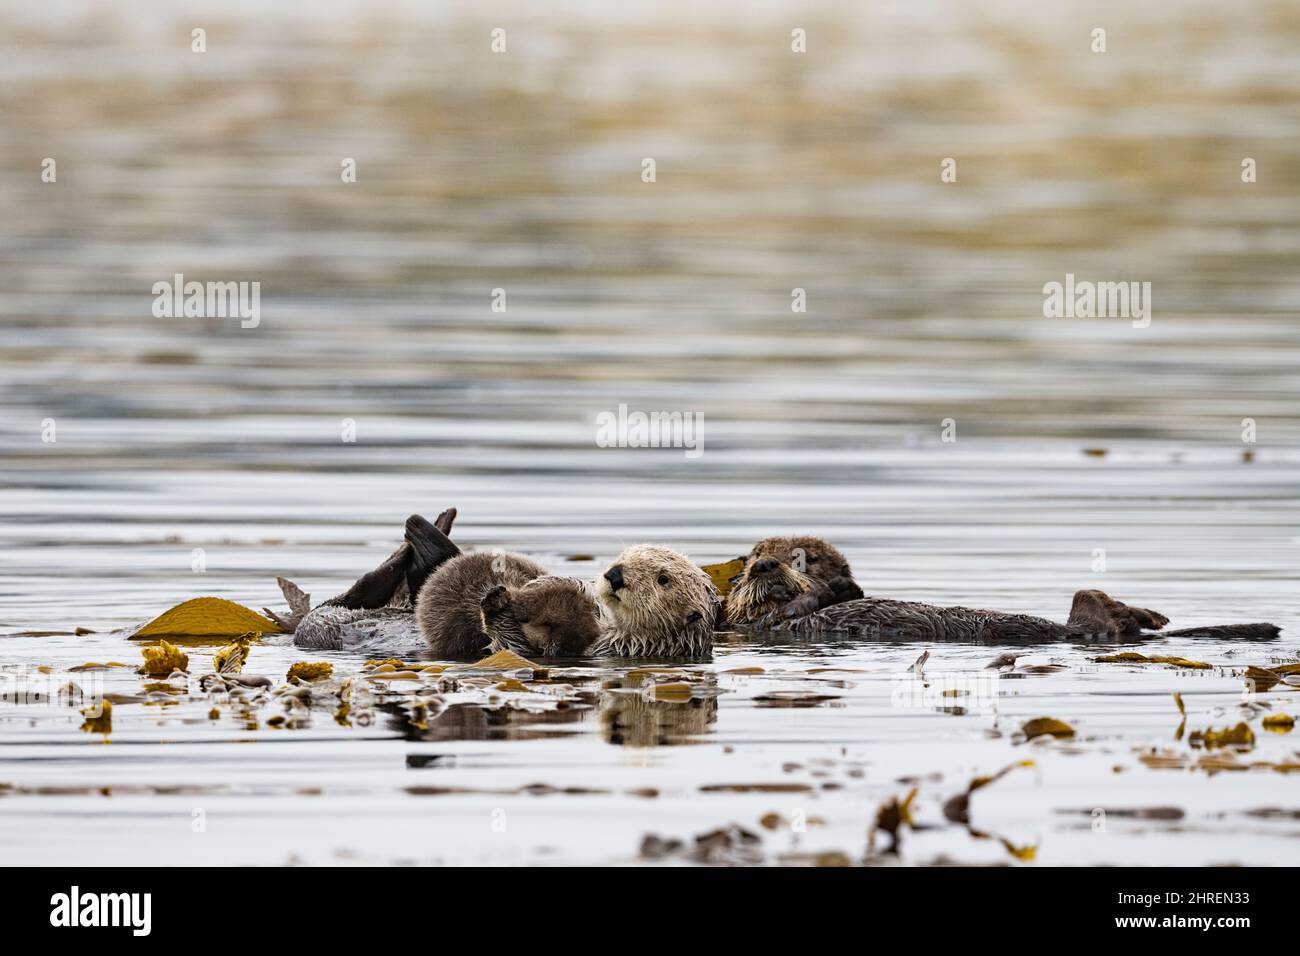 California sea otters, Enhyrdra lutris nereis ( threatened species ), mother holding pup while resting in kelp bed, supported by floating kelp fronds, Stock Photo